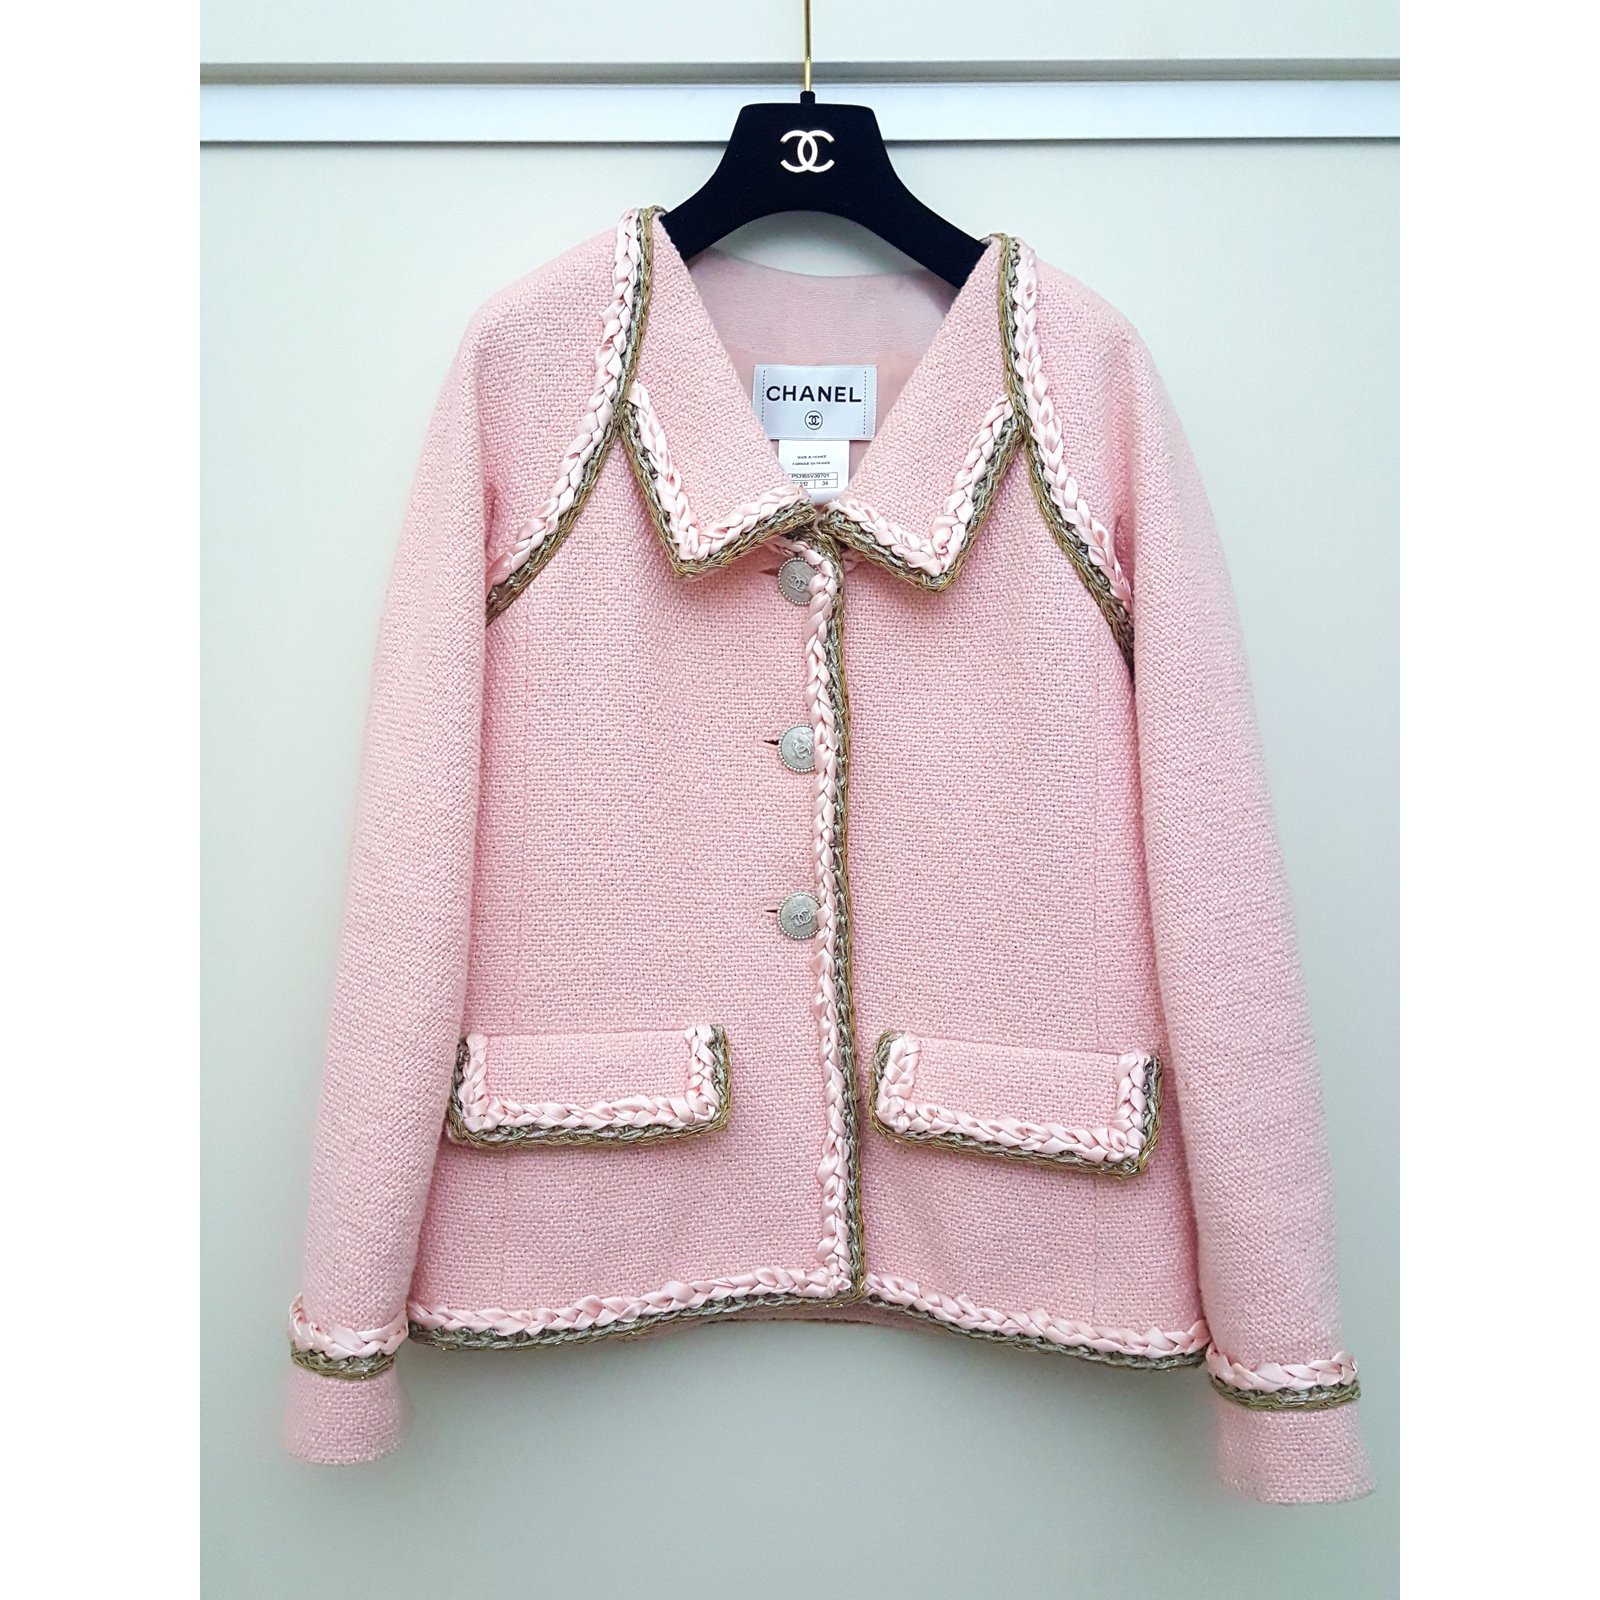 CHANEL 16C Cruise Resort 2016 Seoul Collection Pink Cotton Tweed Jacket